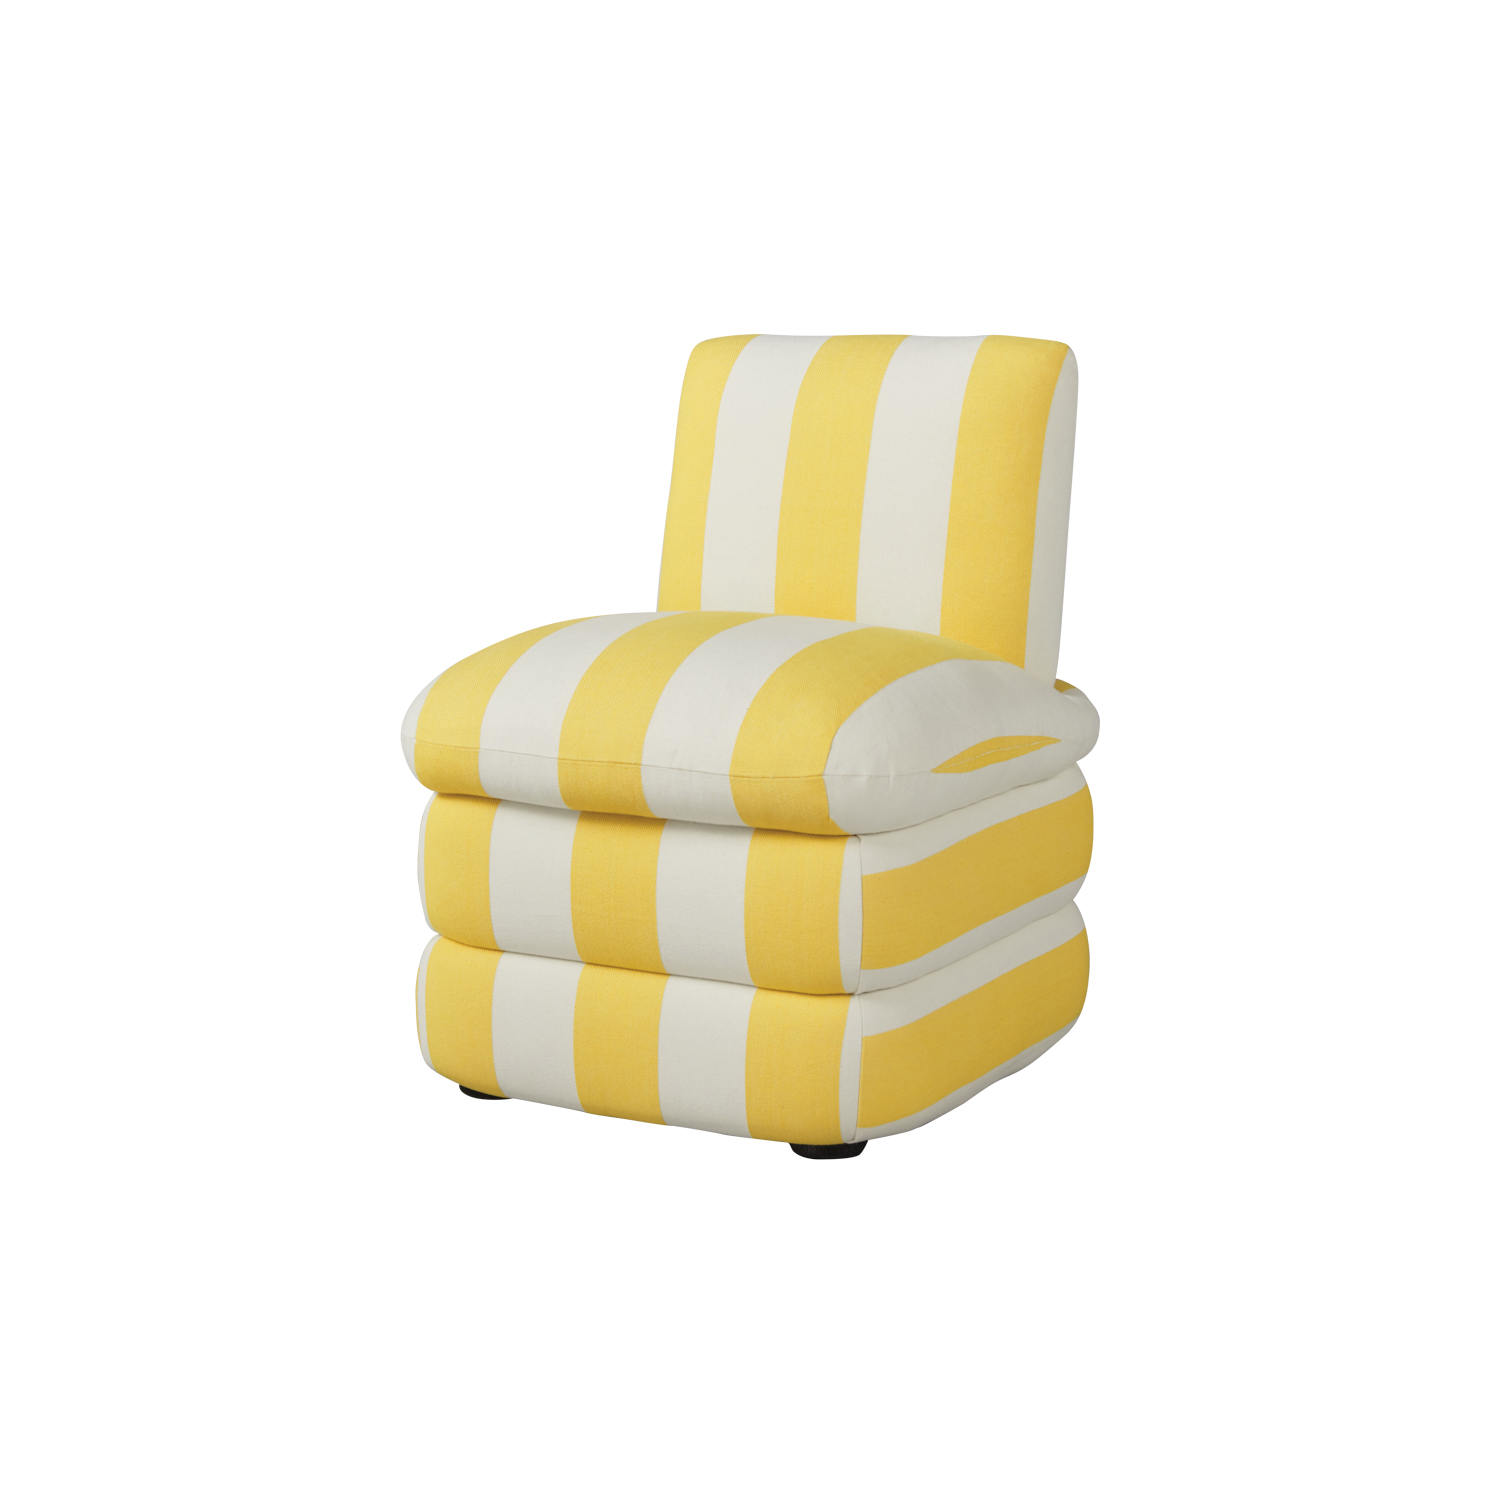 yellow striped chair with many pillows